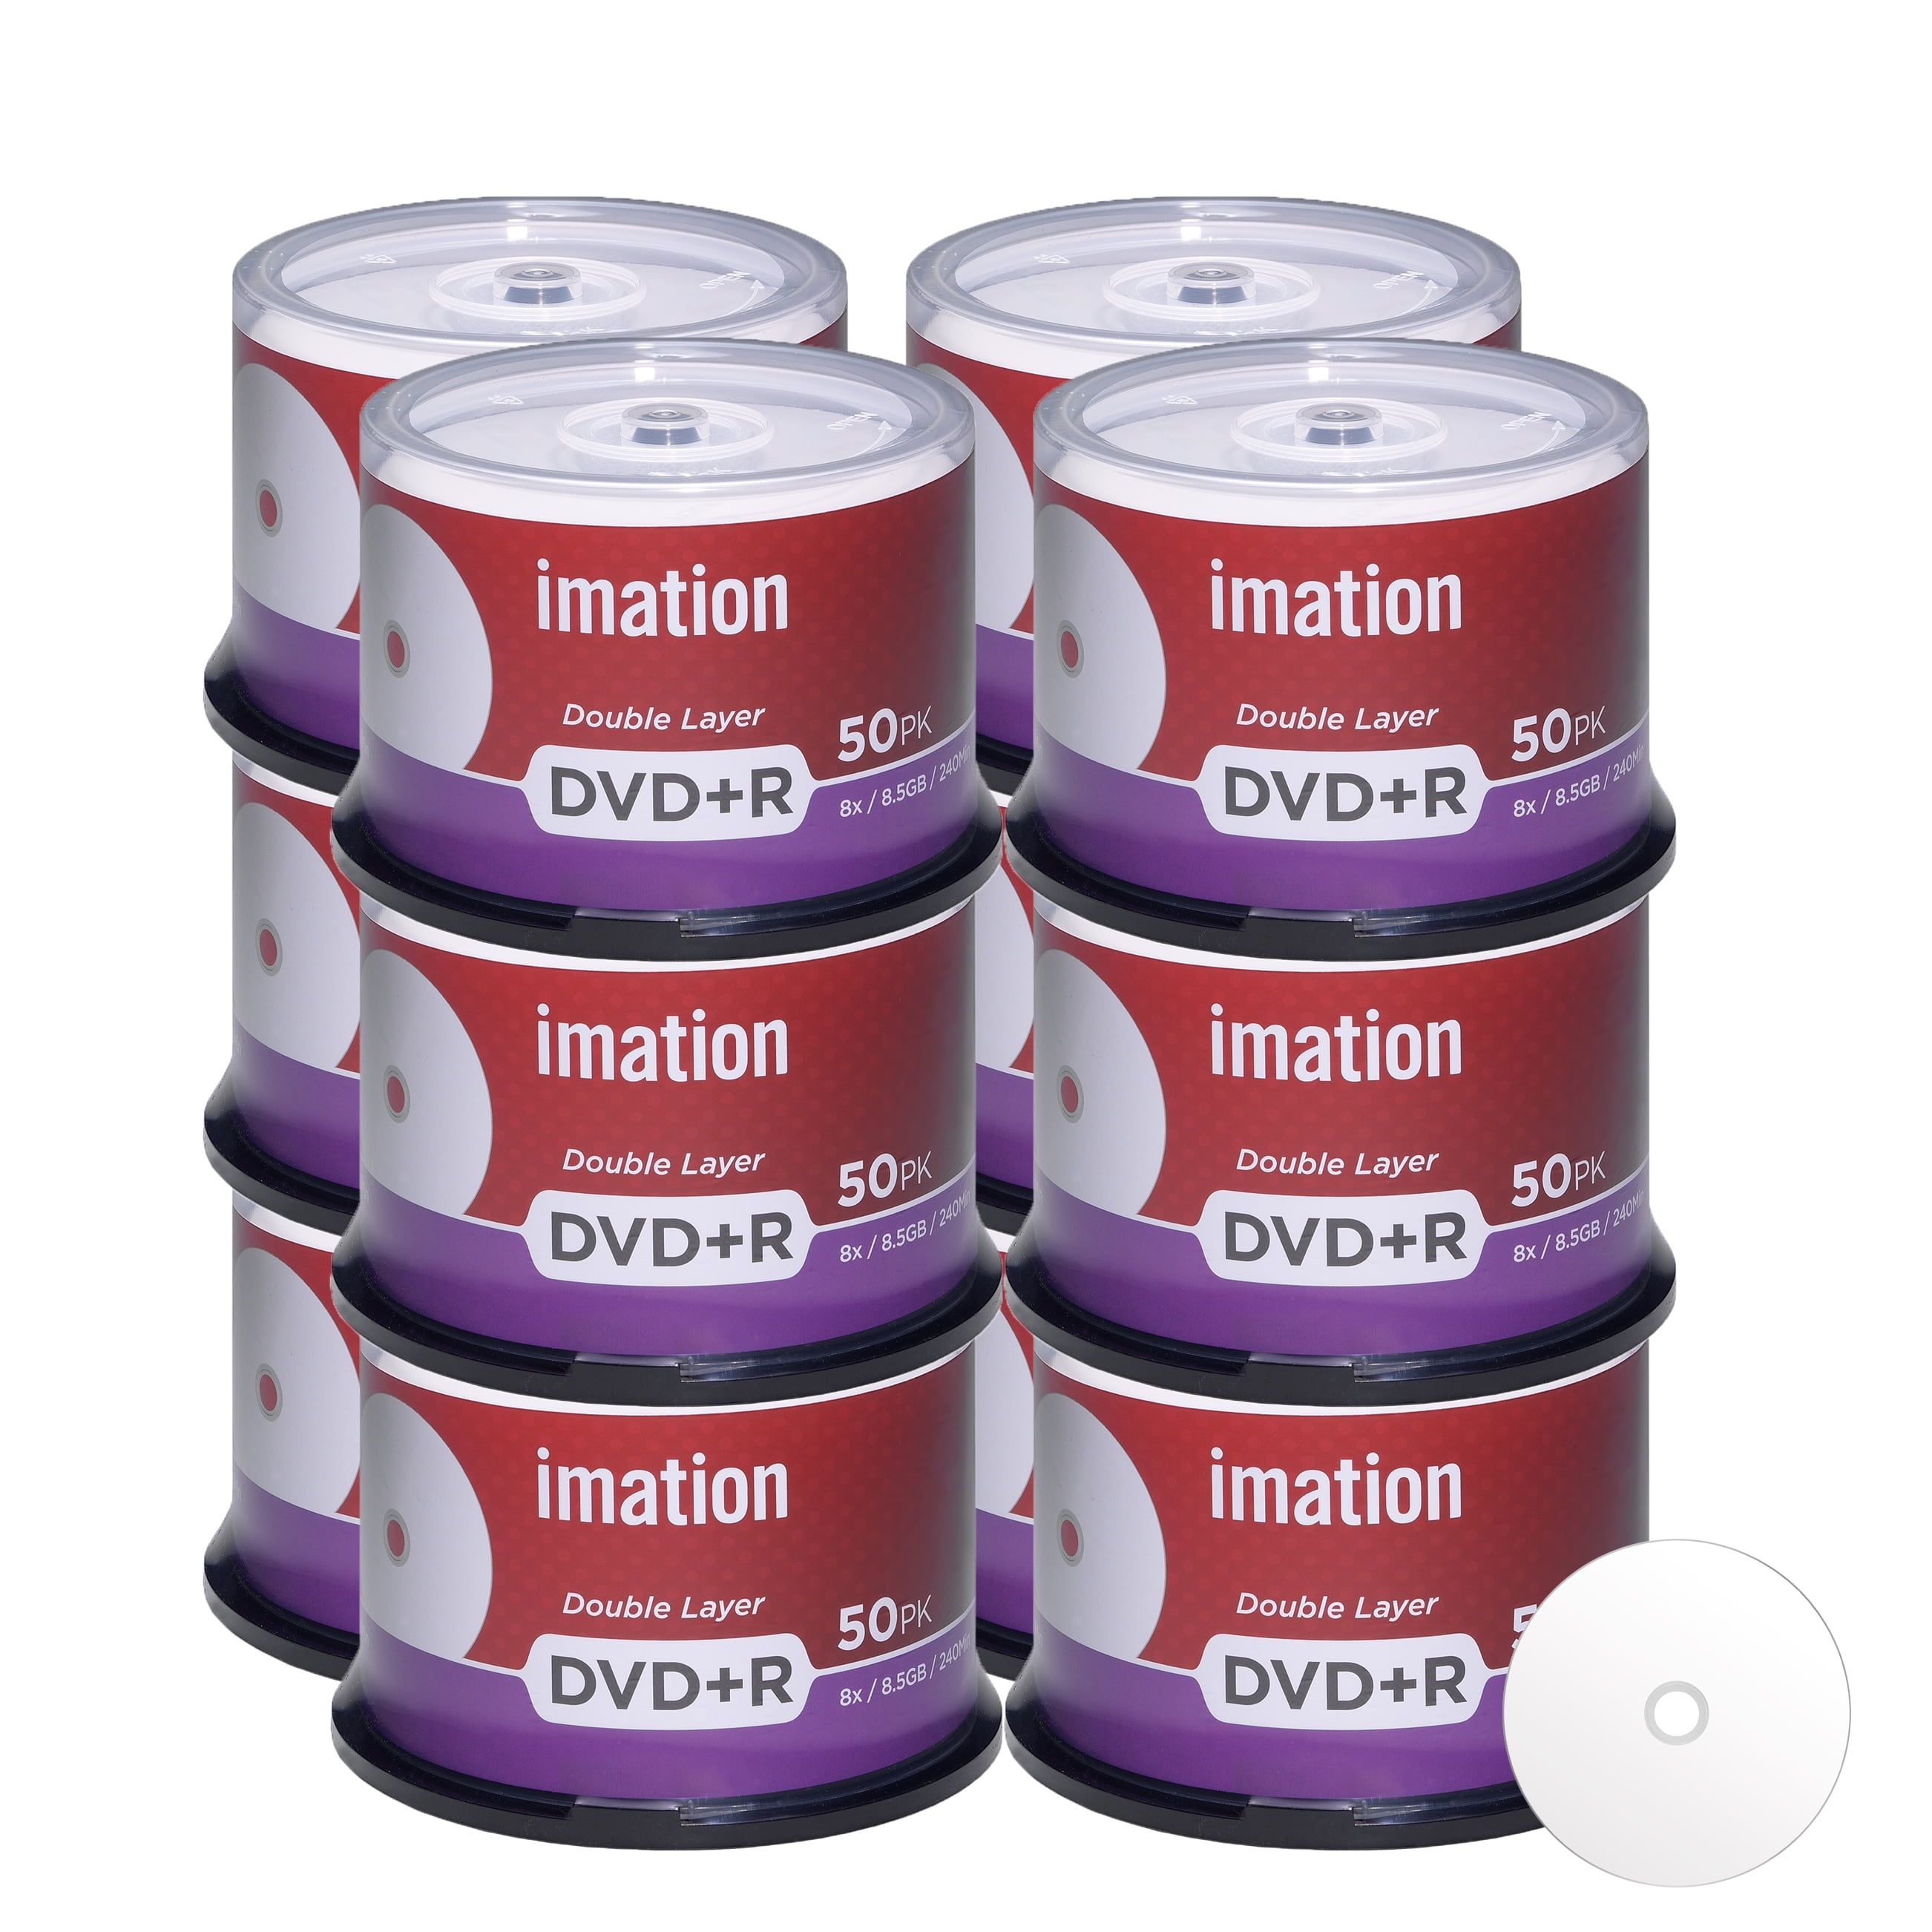 600-pack-imation-dvd-r-dl-dual-layer-8x-8-5gb-dvd-plus-r-double-layer